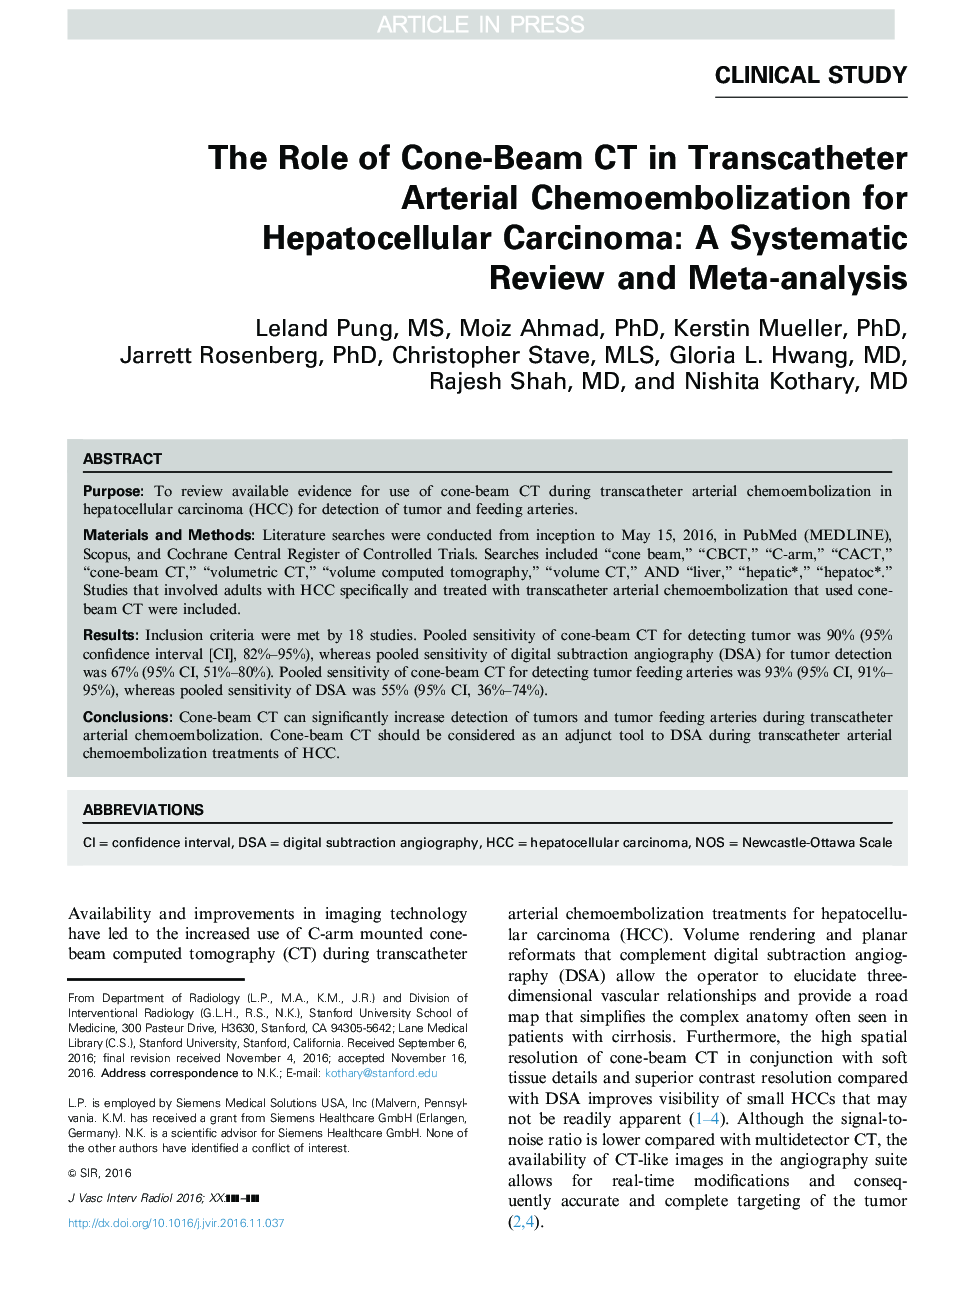 The Role of Cone-Beam CT in Transcatheter Arterial Chemoembolization for Hepatocellular Carcinoma: A Systematic Review and Meta-analysis